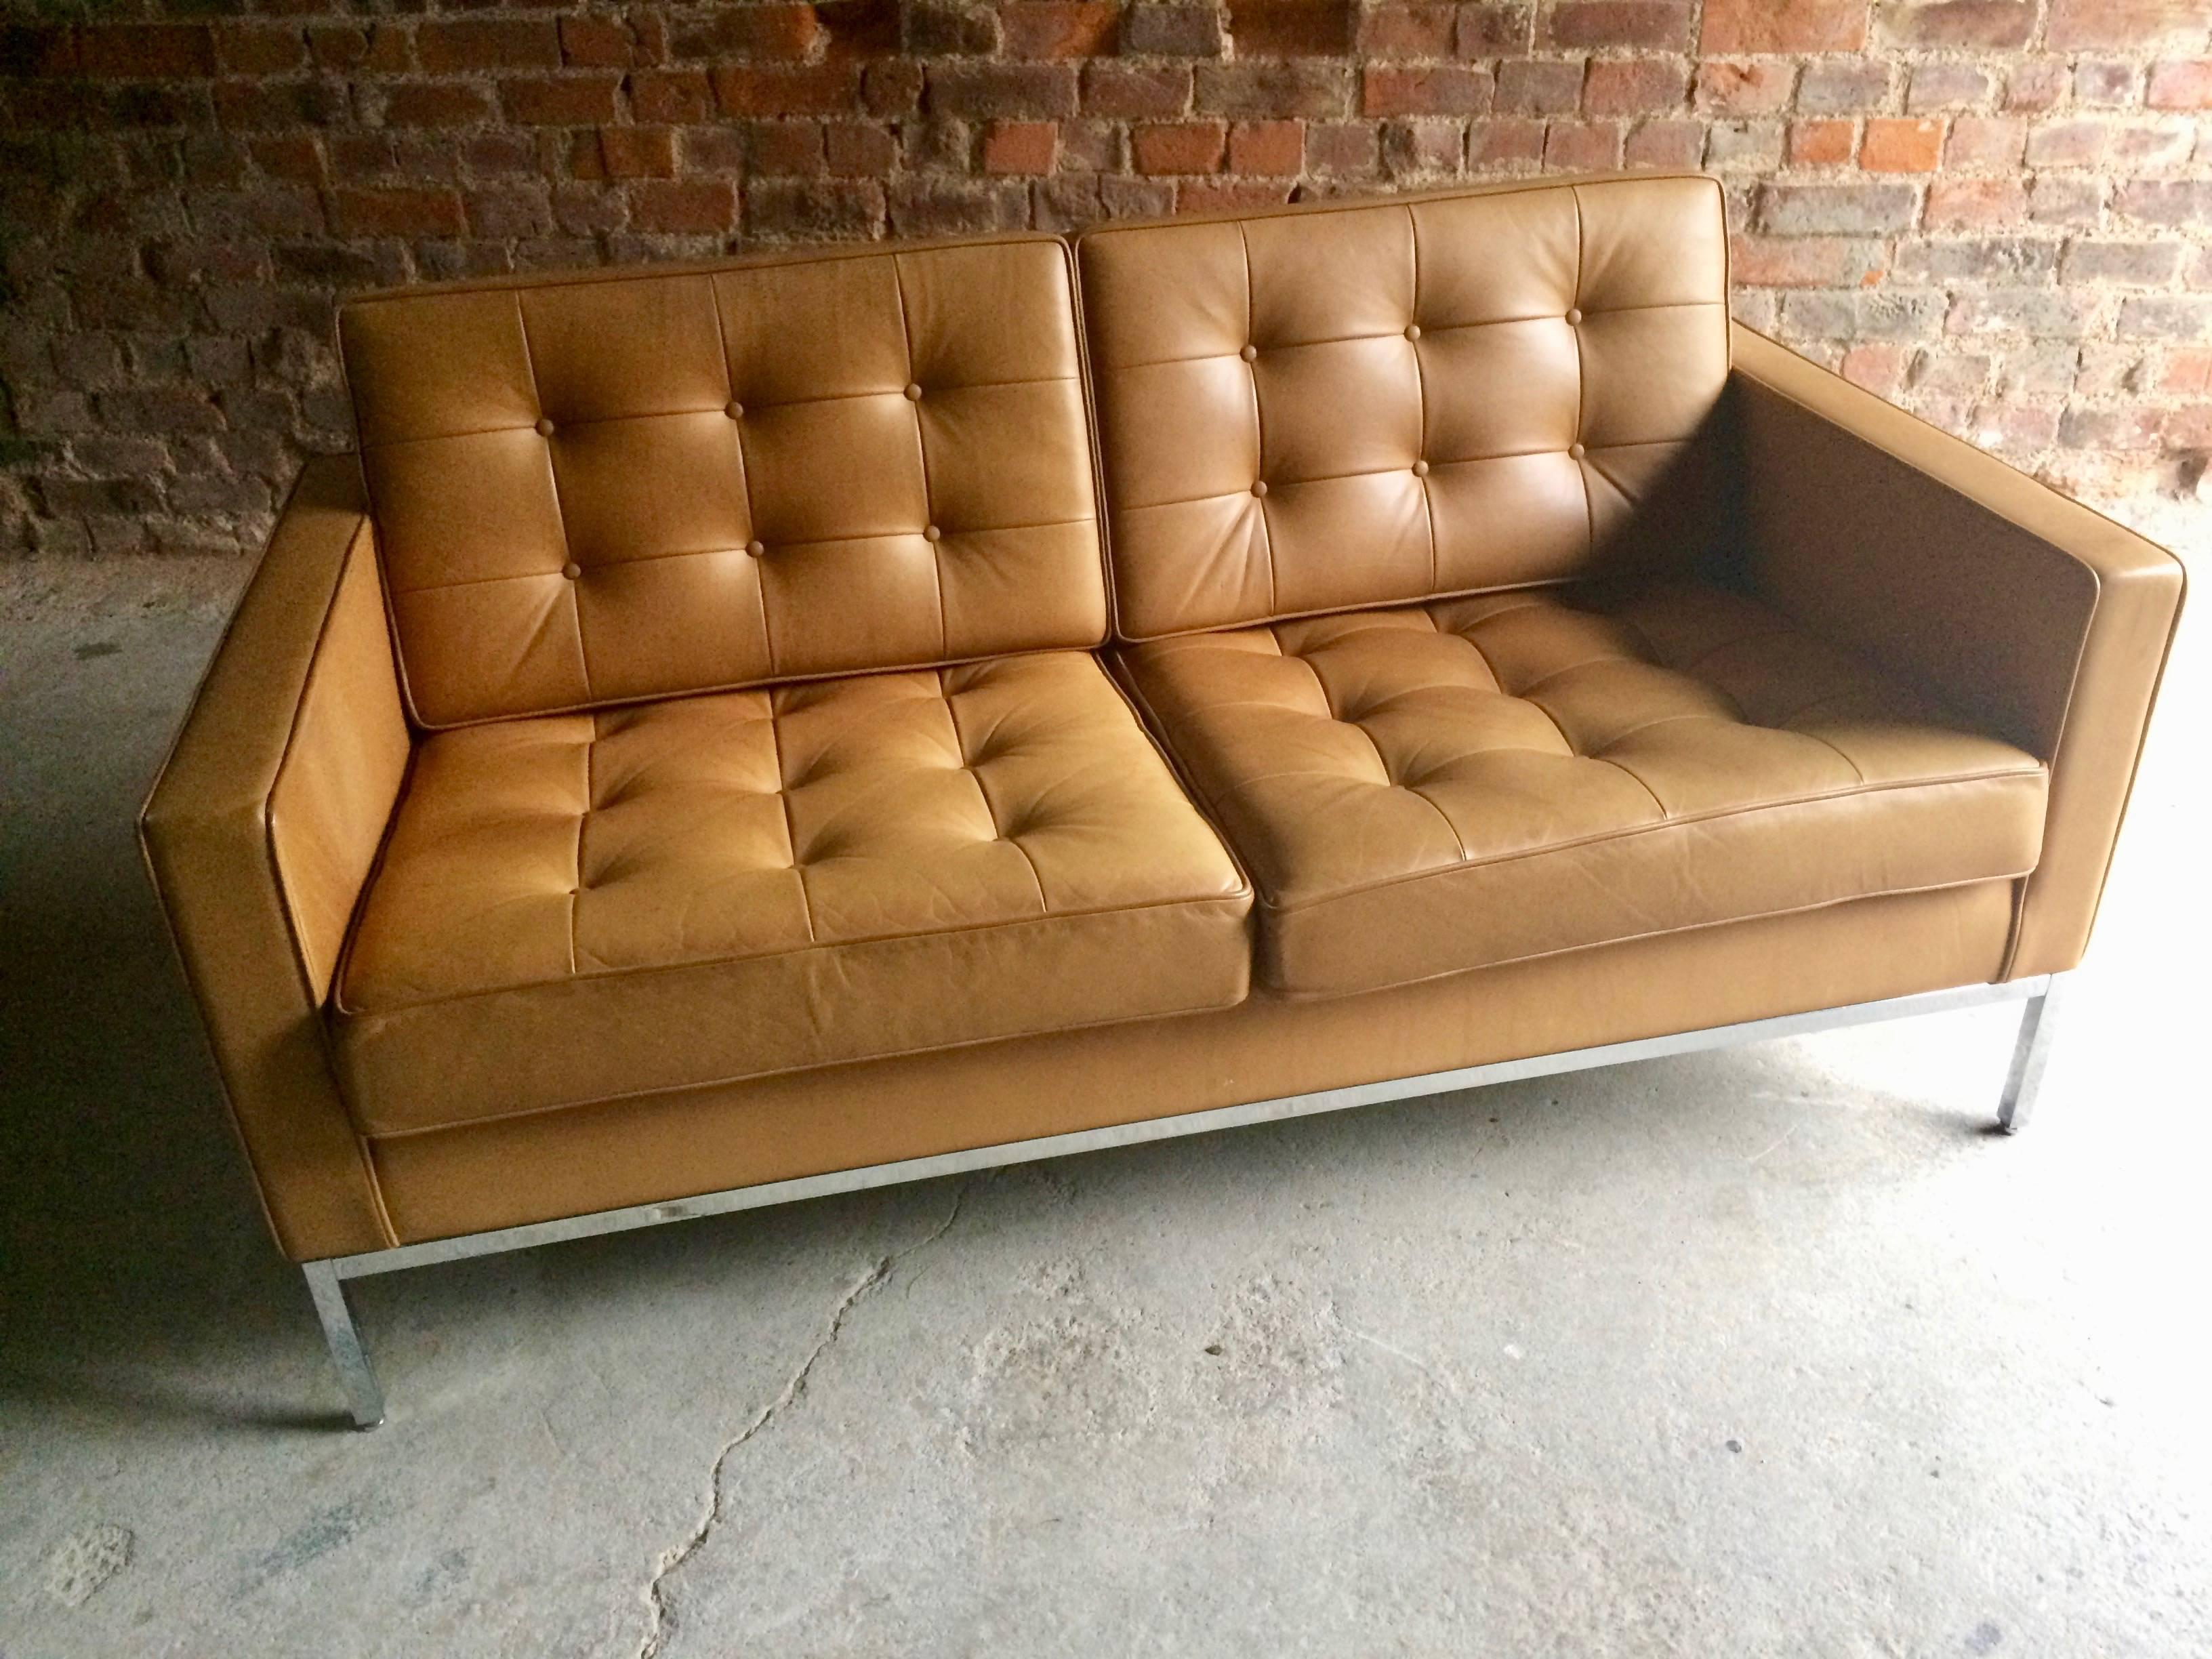 Original Knoll Studio Two-Seat Leather Sofa Settee by Florence Knoll 2 In Excellent Condition In Longdon, Tewkesbury